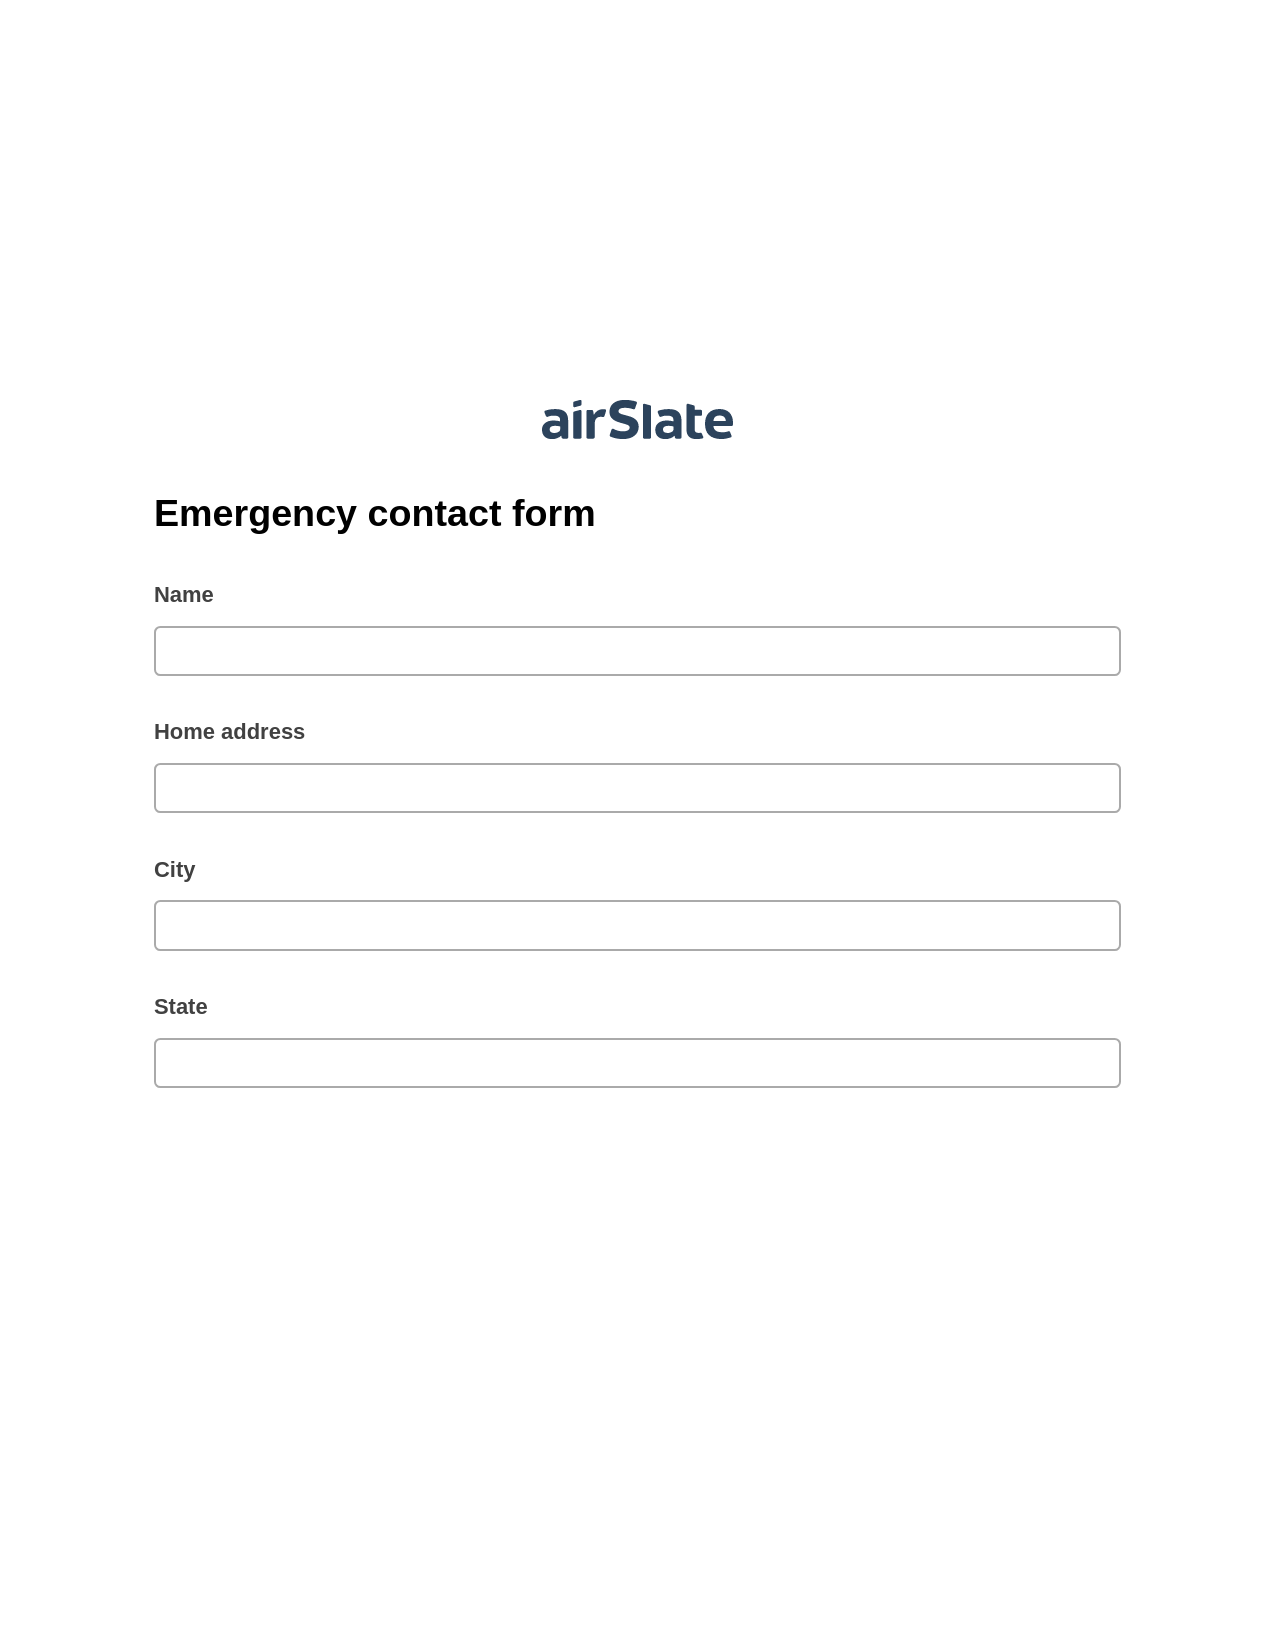 Emergency contact form Pre-fill from CSV File Dropdown Options Bot, Audit Trail Bot, Box Bot